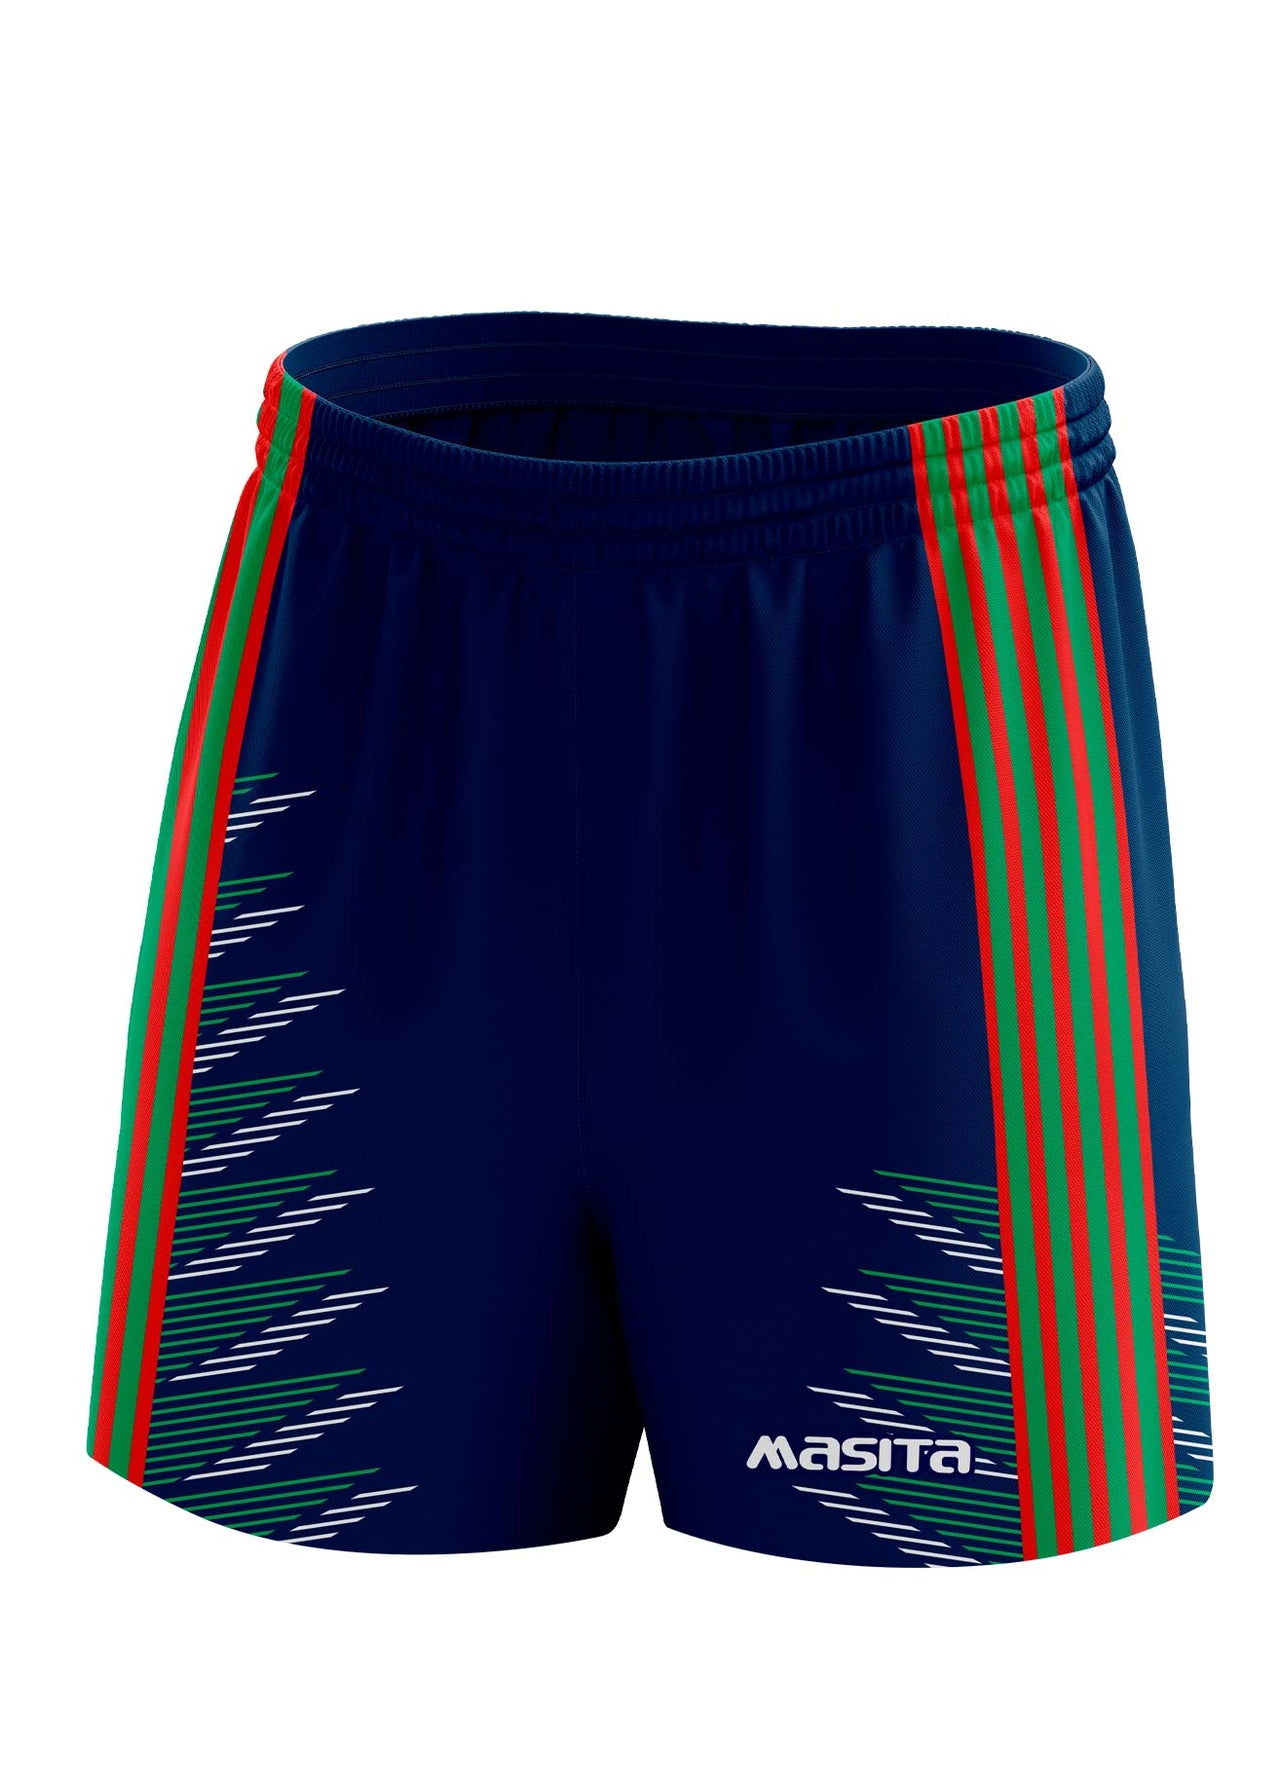 Hydro Gaelic Shorts Navy/Green/Red Adult